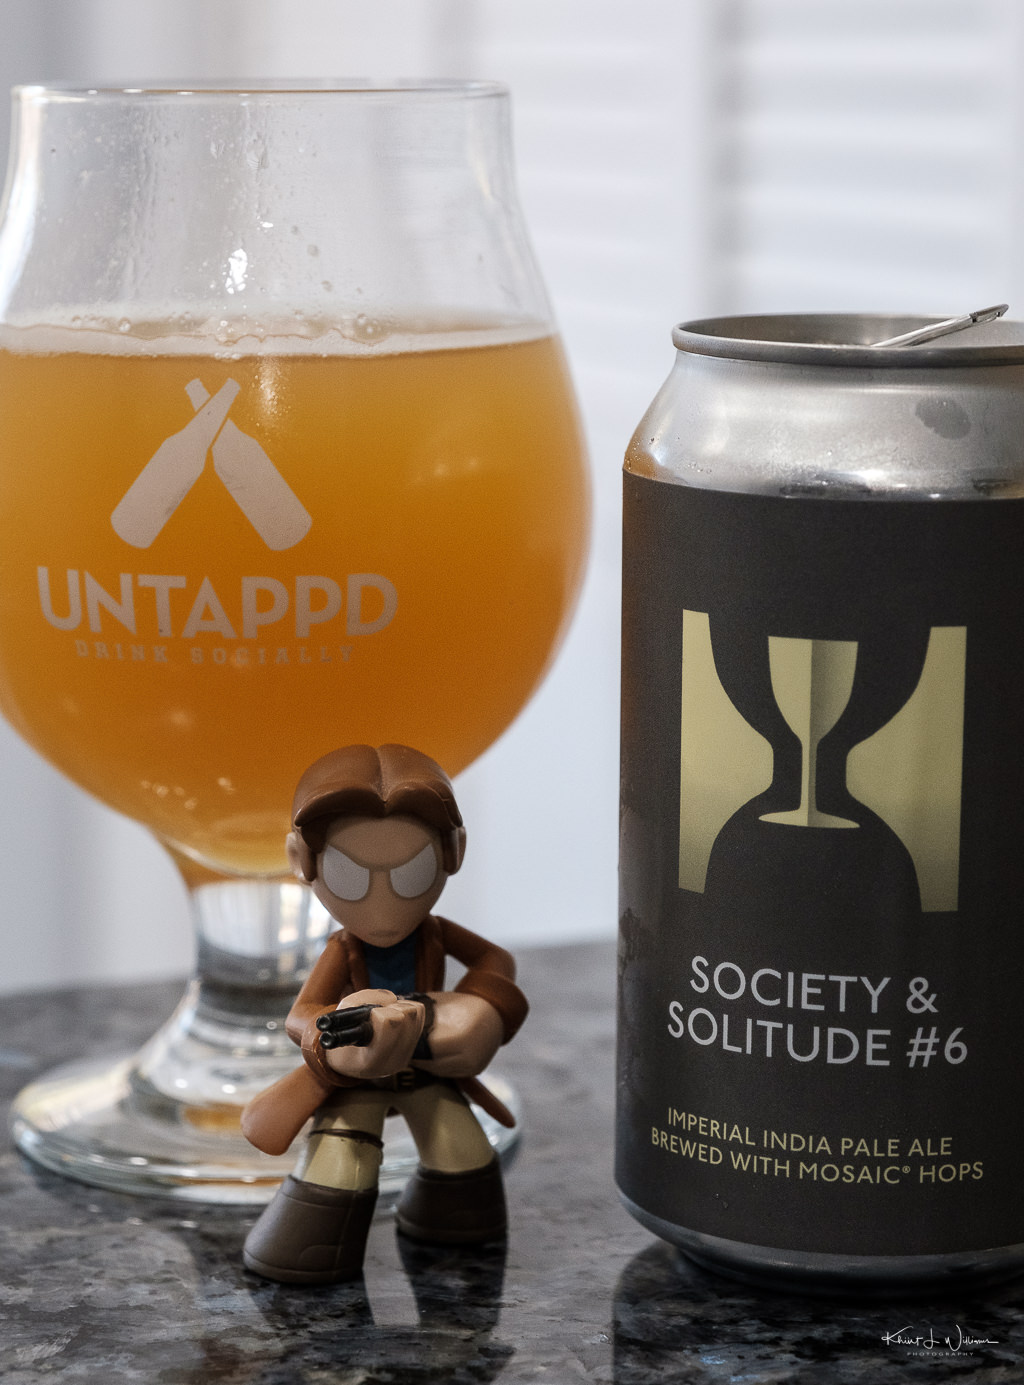 Society & Solitude #6 by Hill Farmstead Brewery